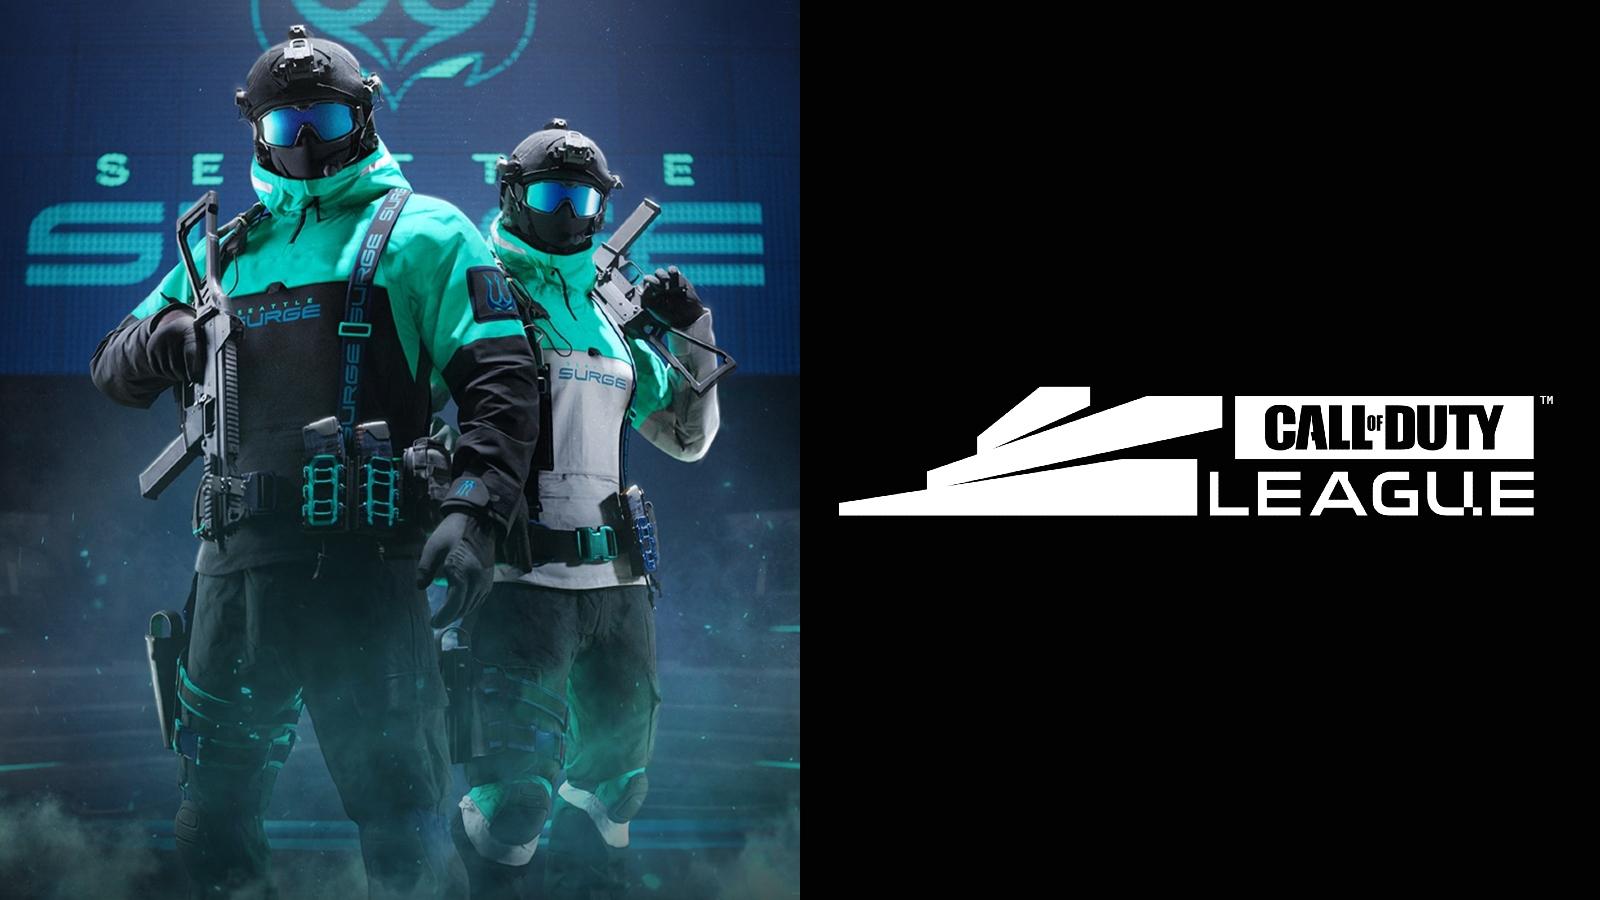 Side by side image of Call of Duty League team operator camos with CDL logo